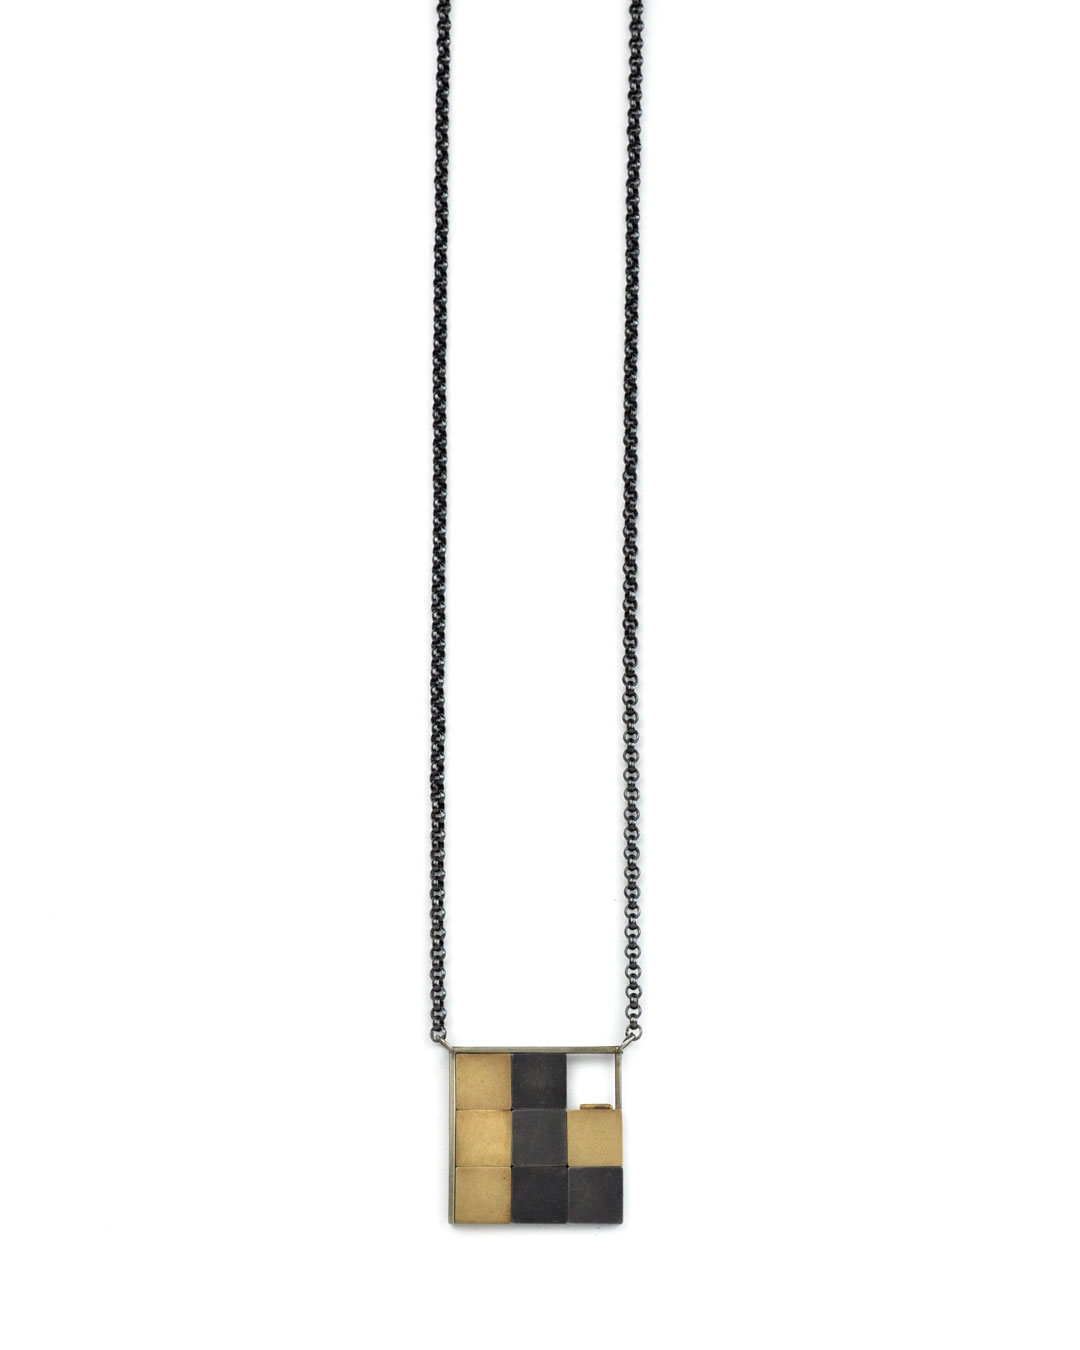 Herman Hermsen, Expensive Game, 1995, pendant; 18ct white gold, 18ct yellow gold, silver, 440 x 100 x 3 mm, €3650